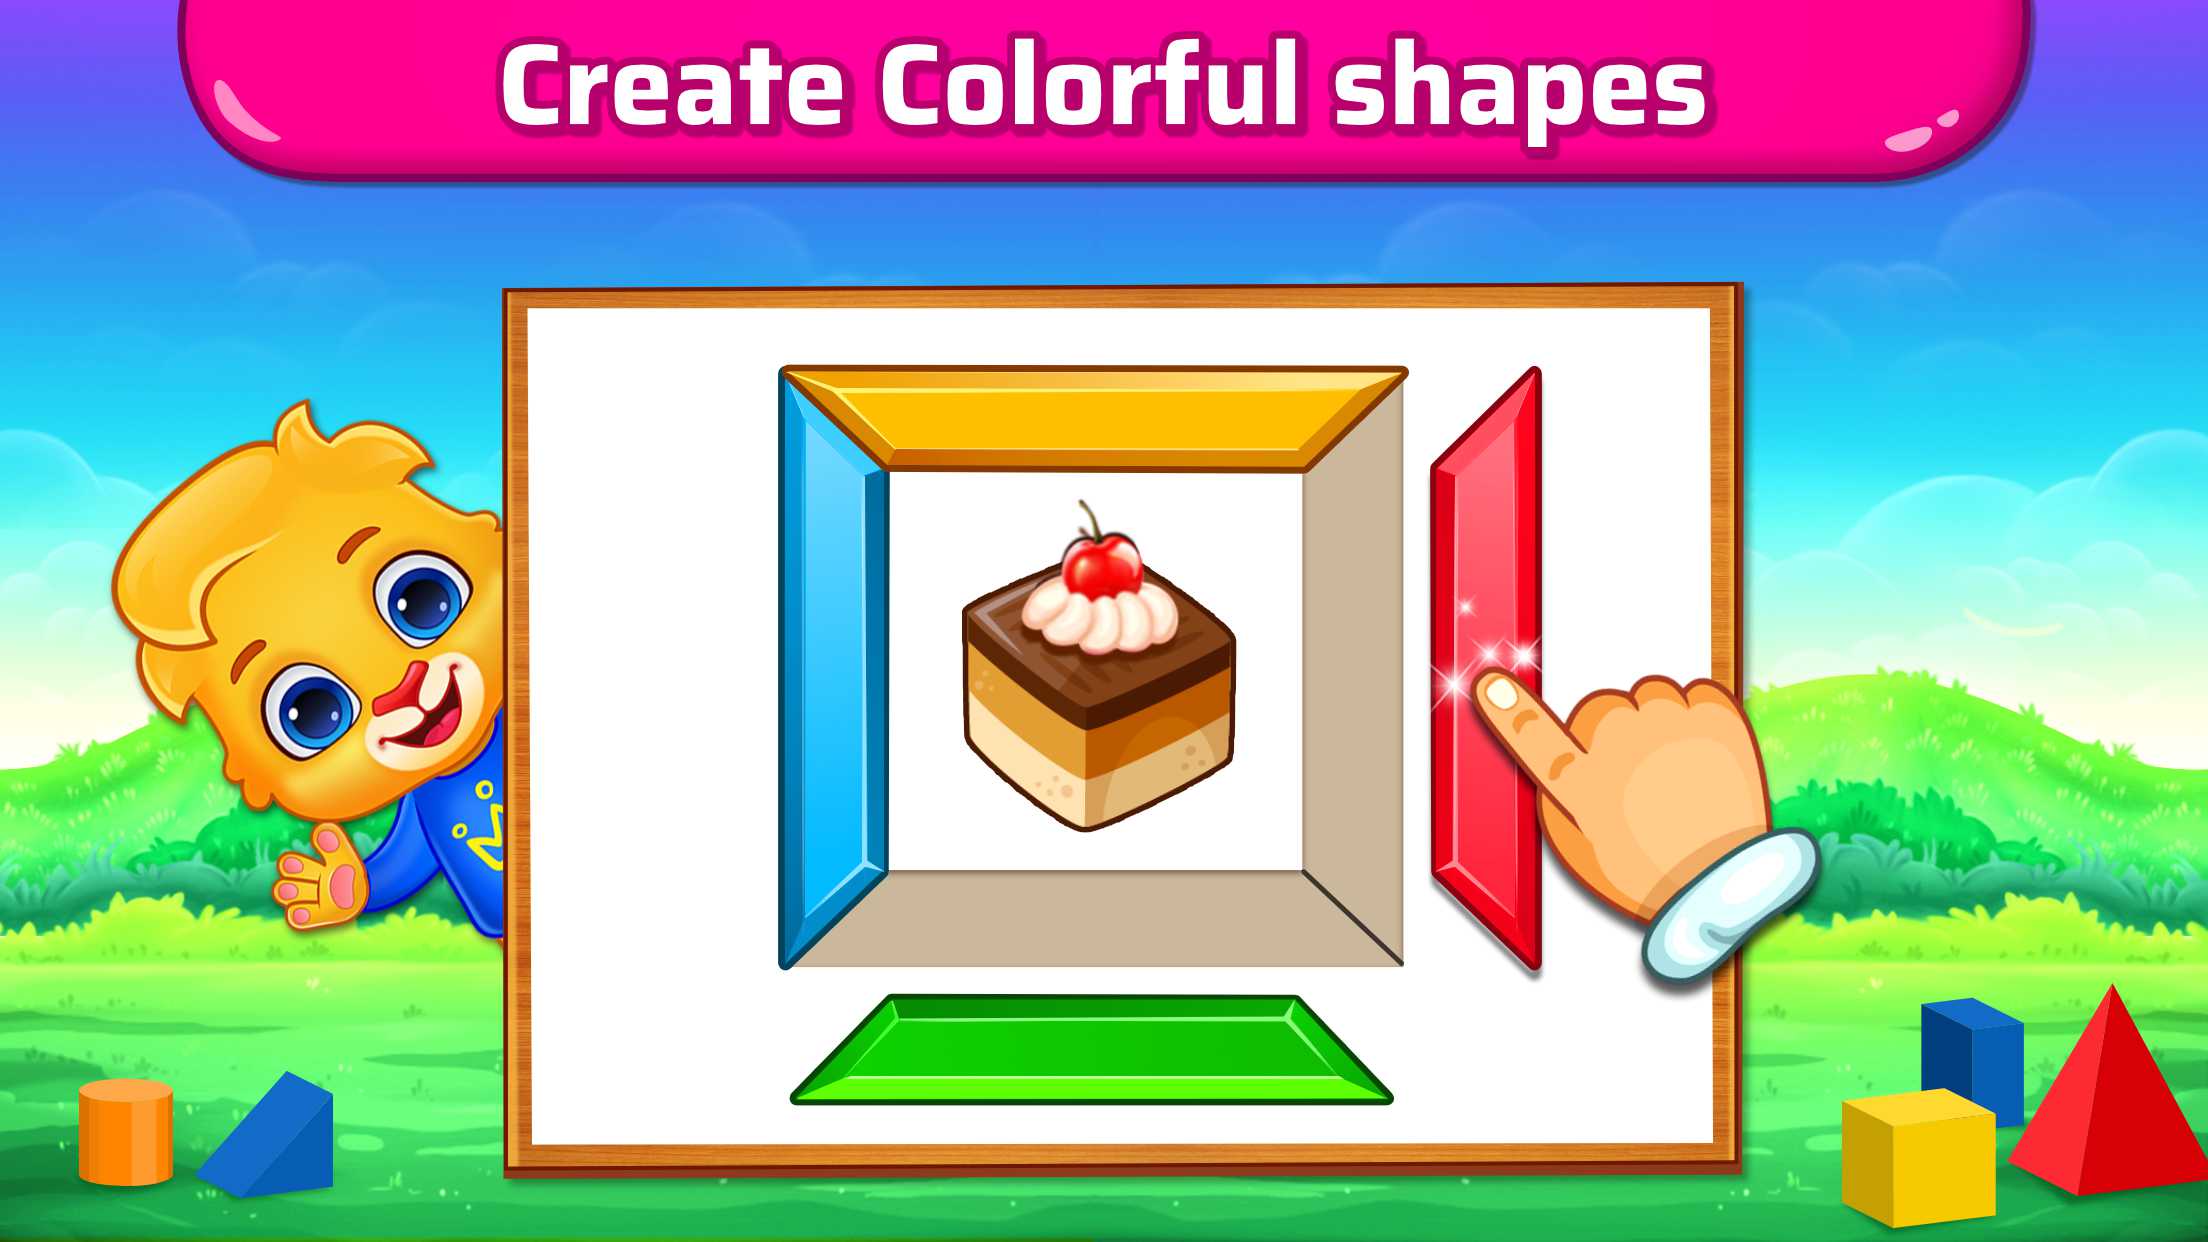 Colors & Shapes Android App